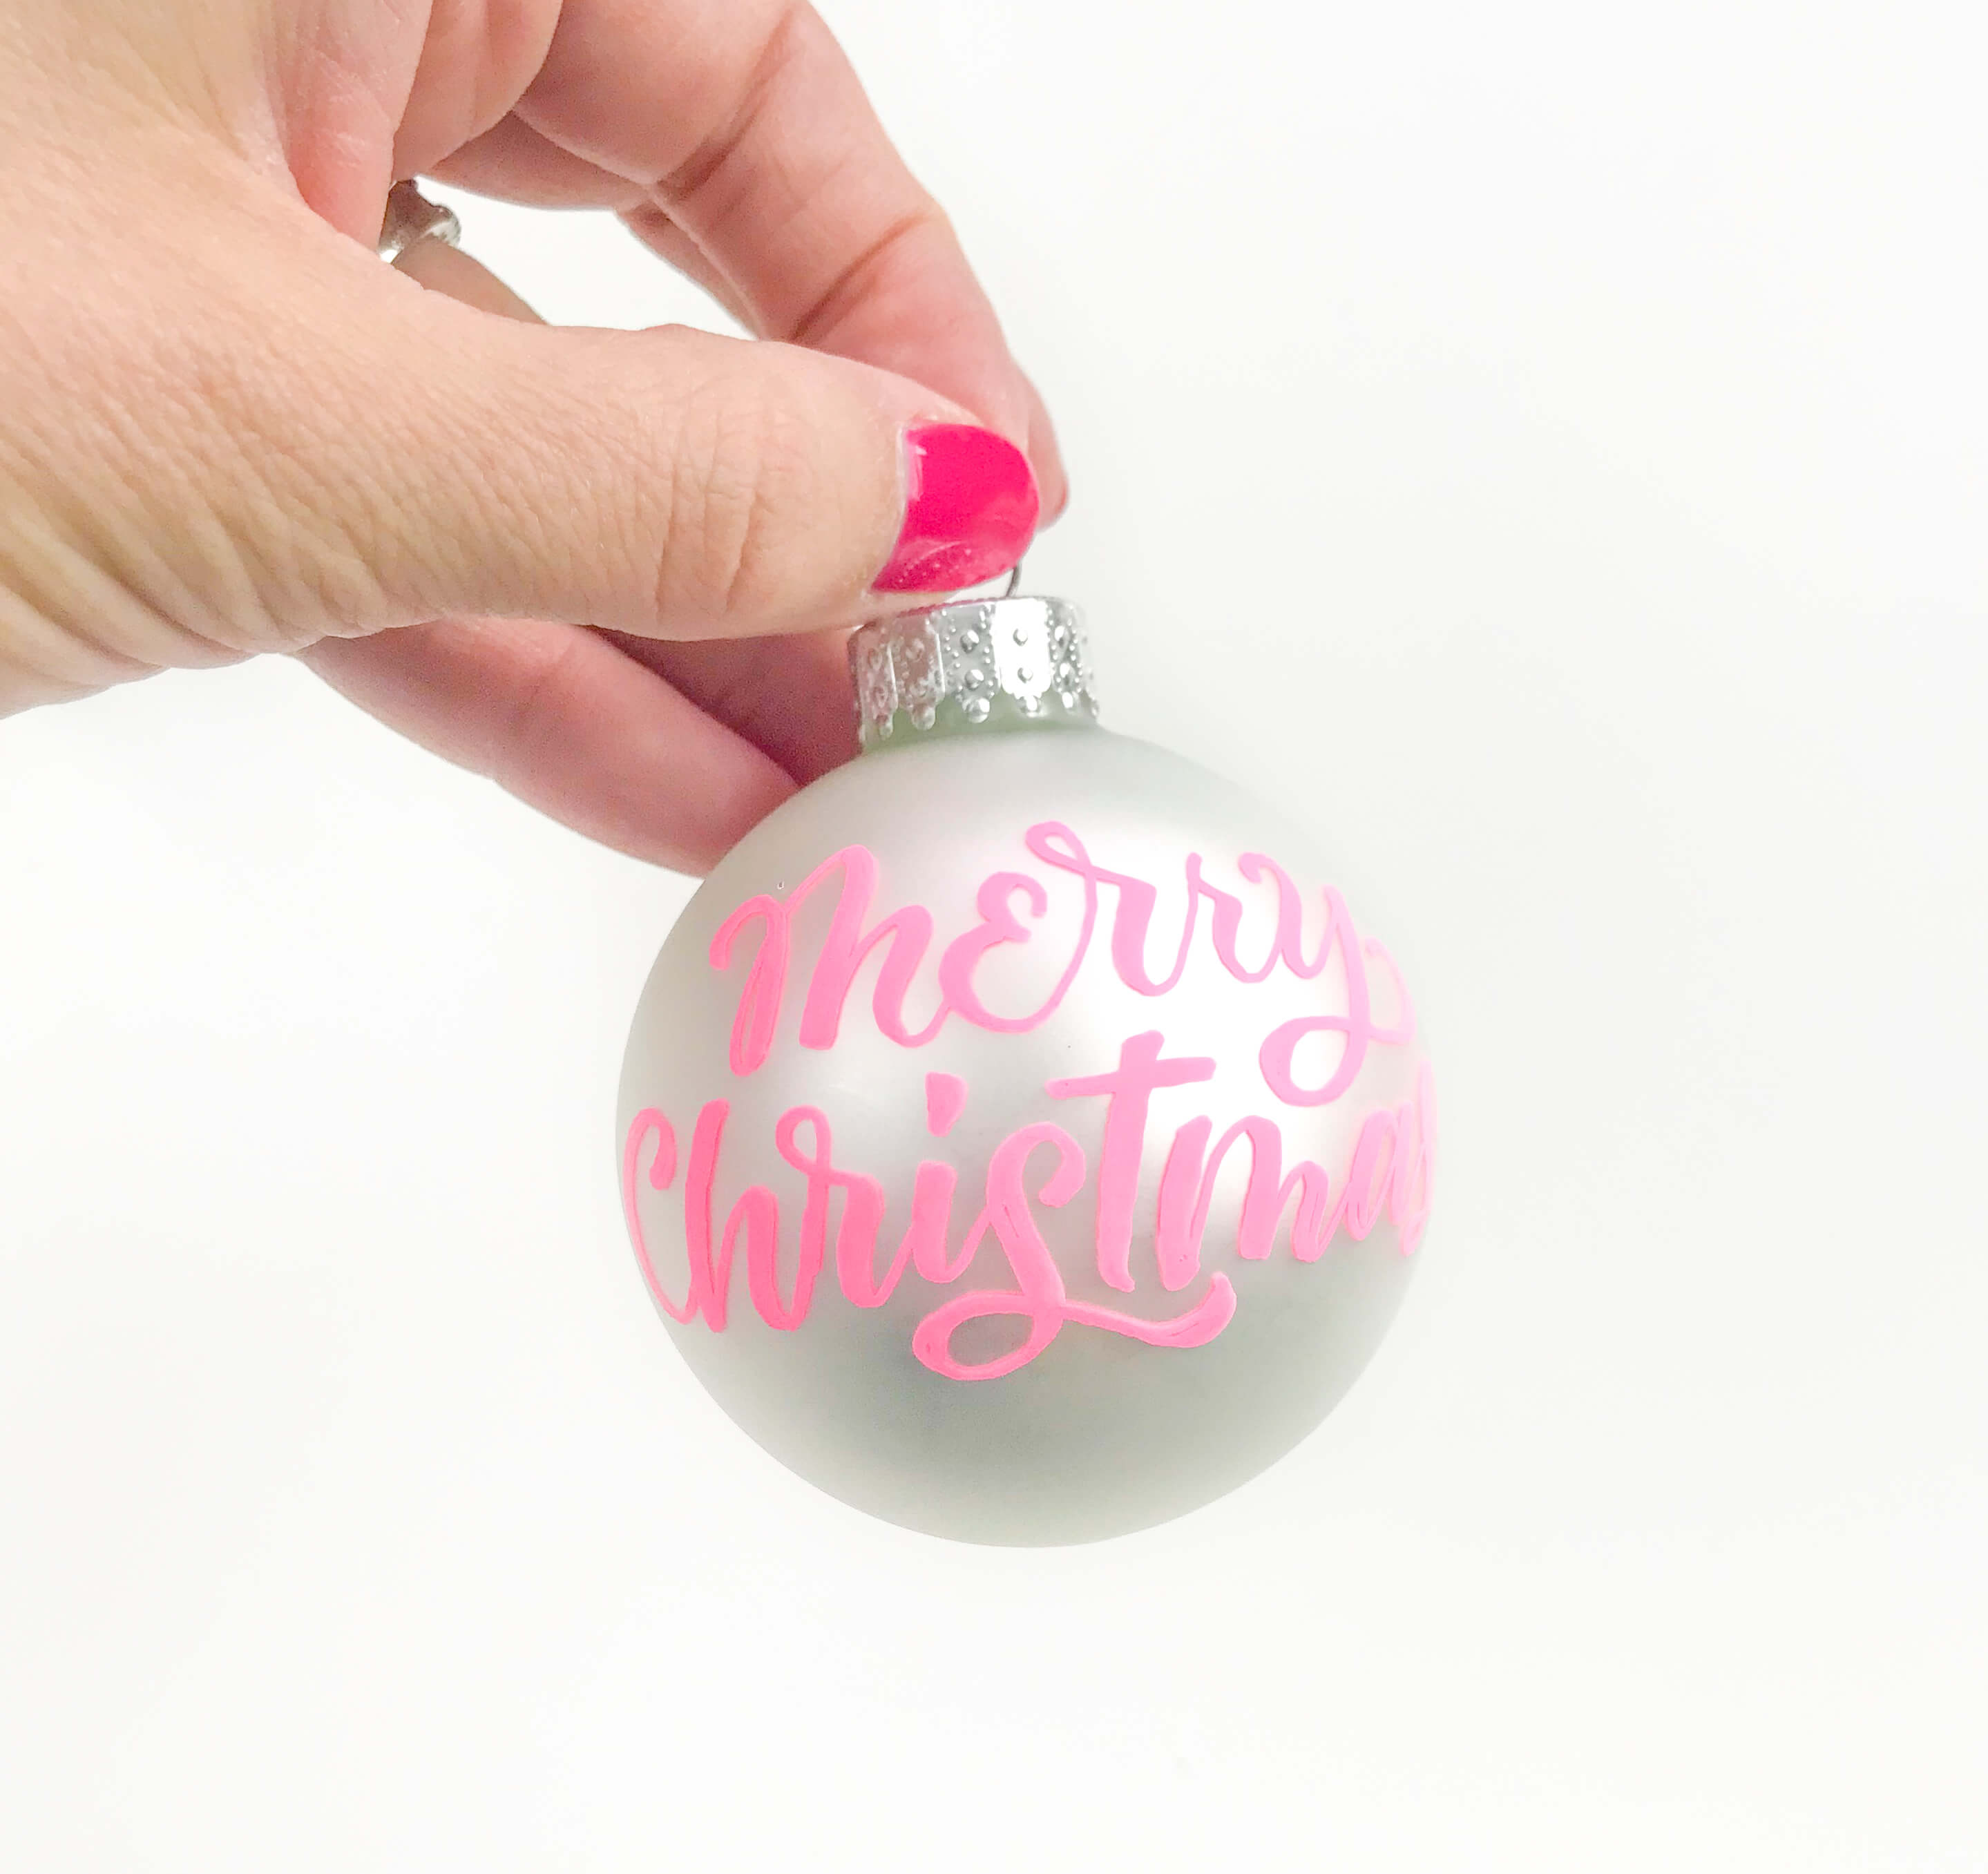 Find all of the tips, tricks and best pens to use to create your own, personalized, hand lettered Christmas ornaments with this free video tutorial and fully linked supply list from Amanda Arneill of amandaarneill.com